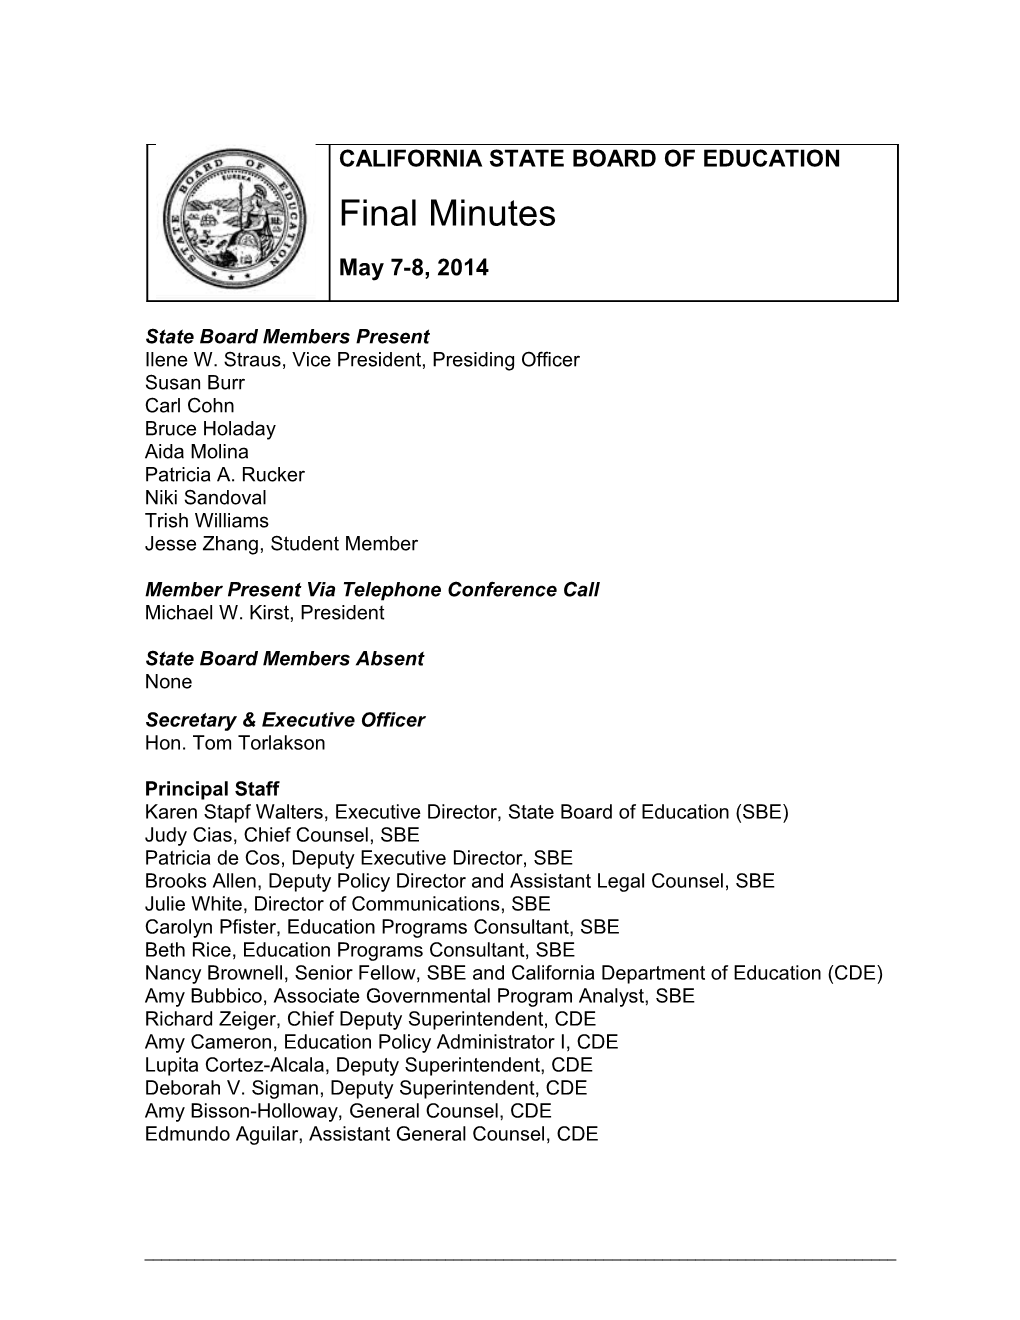 Final Minutes for May 2014 - SBE Minutes (CA State Board of Education)